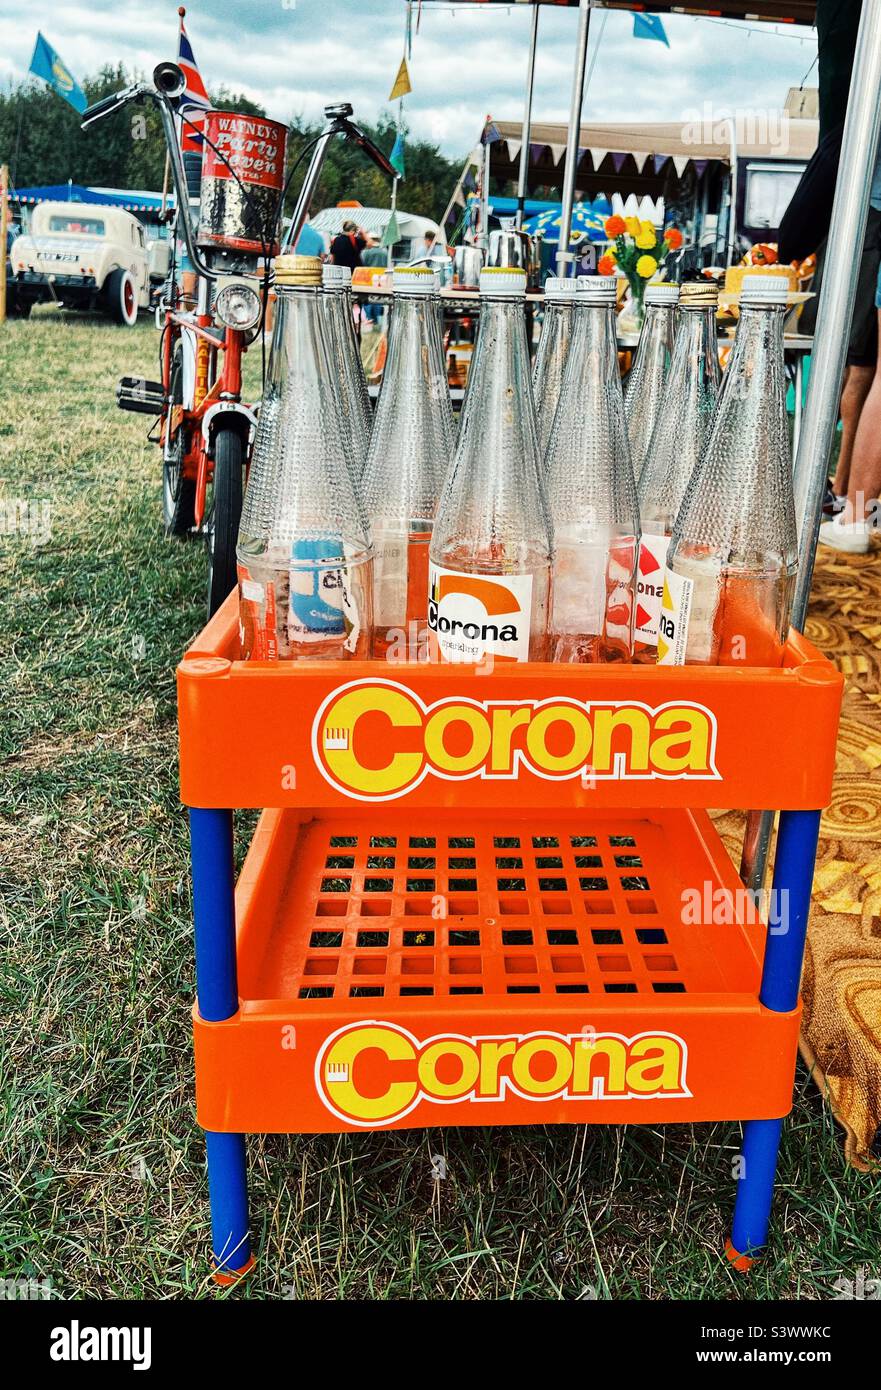 Old Corona Pop bottles from the 1970’s in a Corona display stand Stock Photo